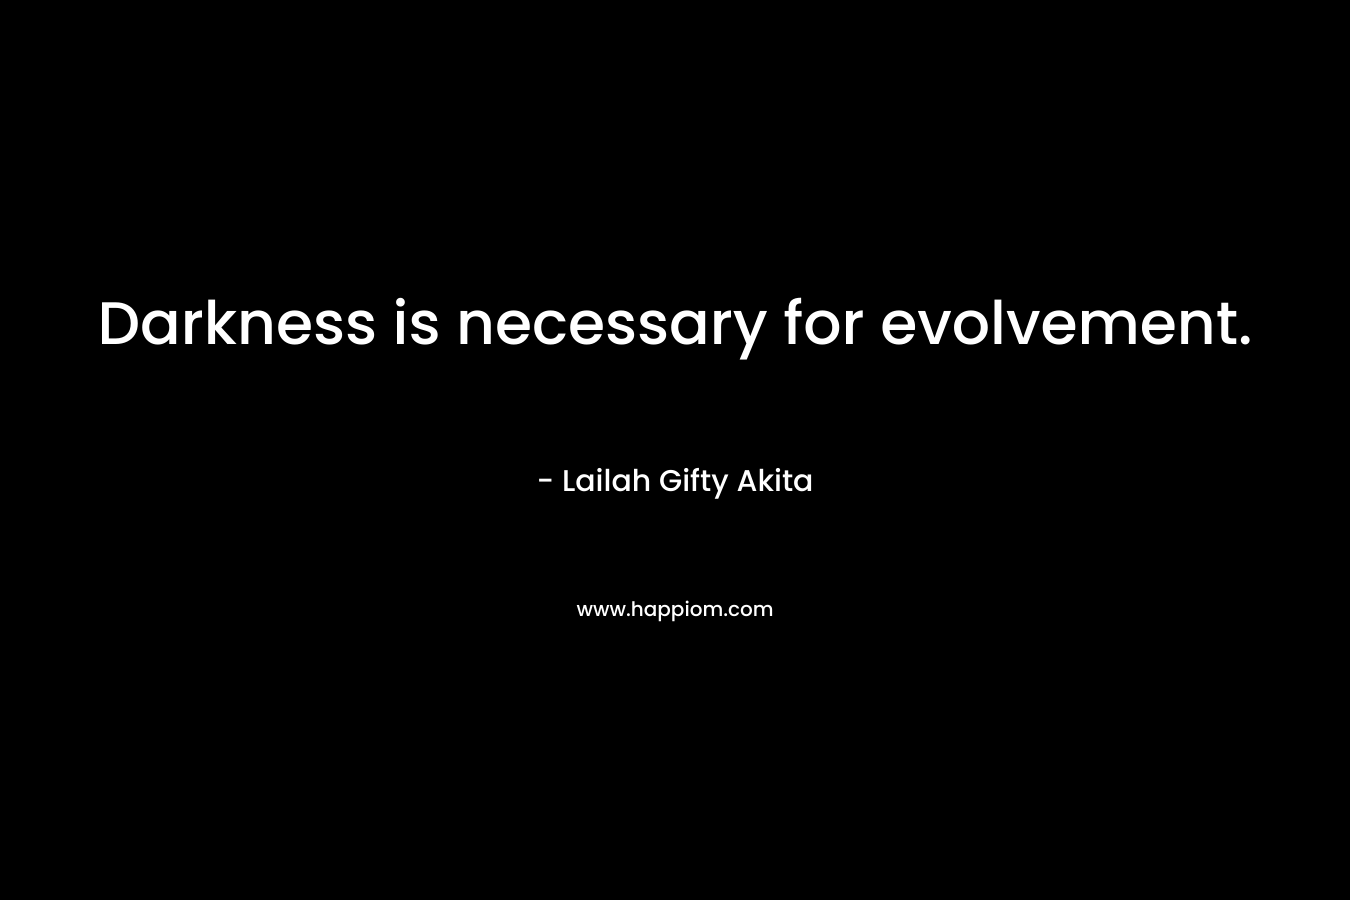 Darkness is necessary for evolvement.